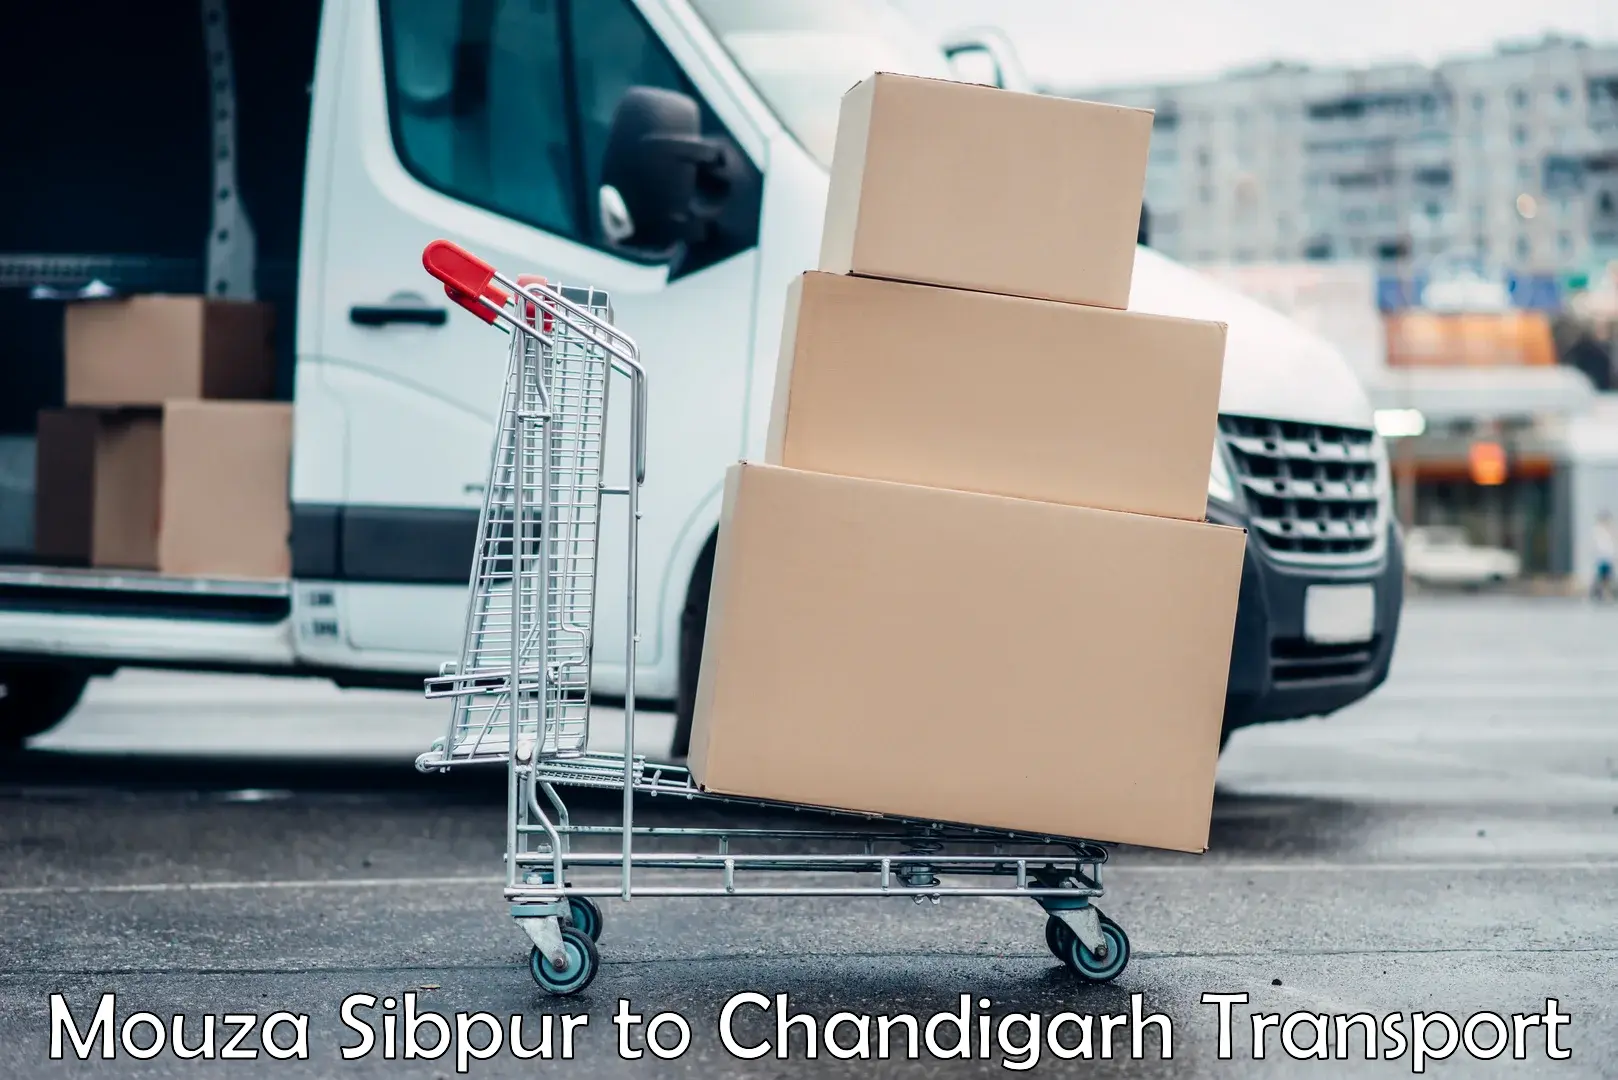 Online transport booking Mouza Sibpur to Chandigarh